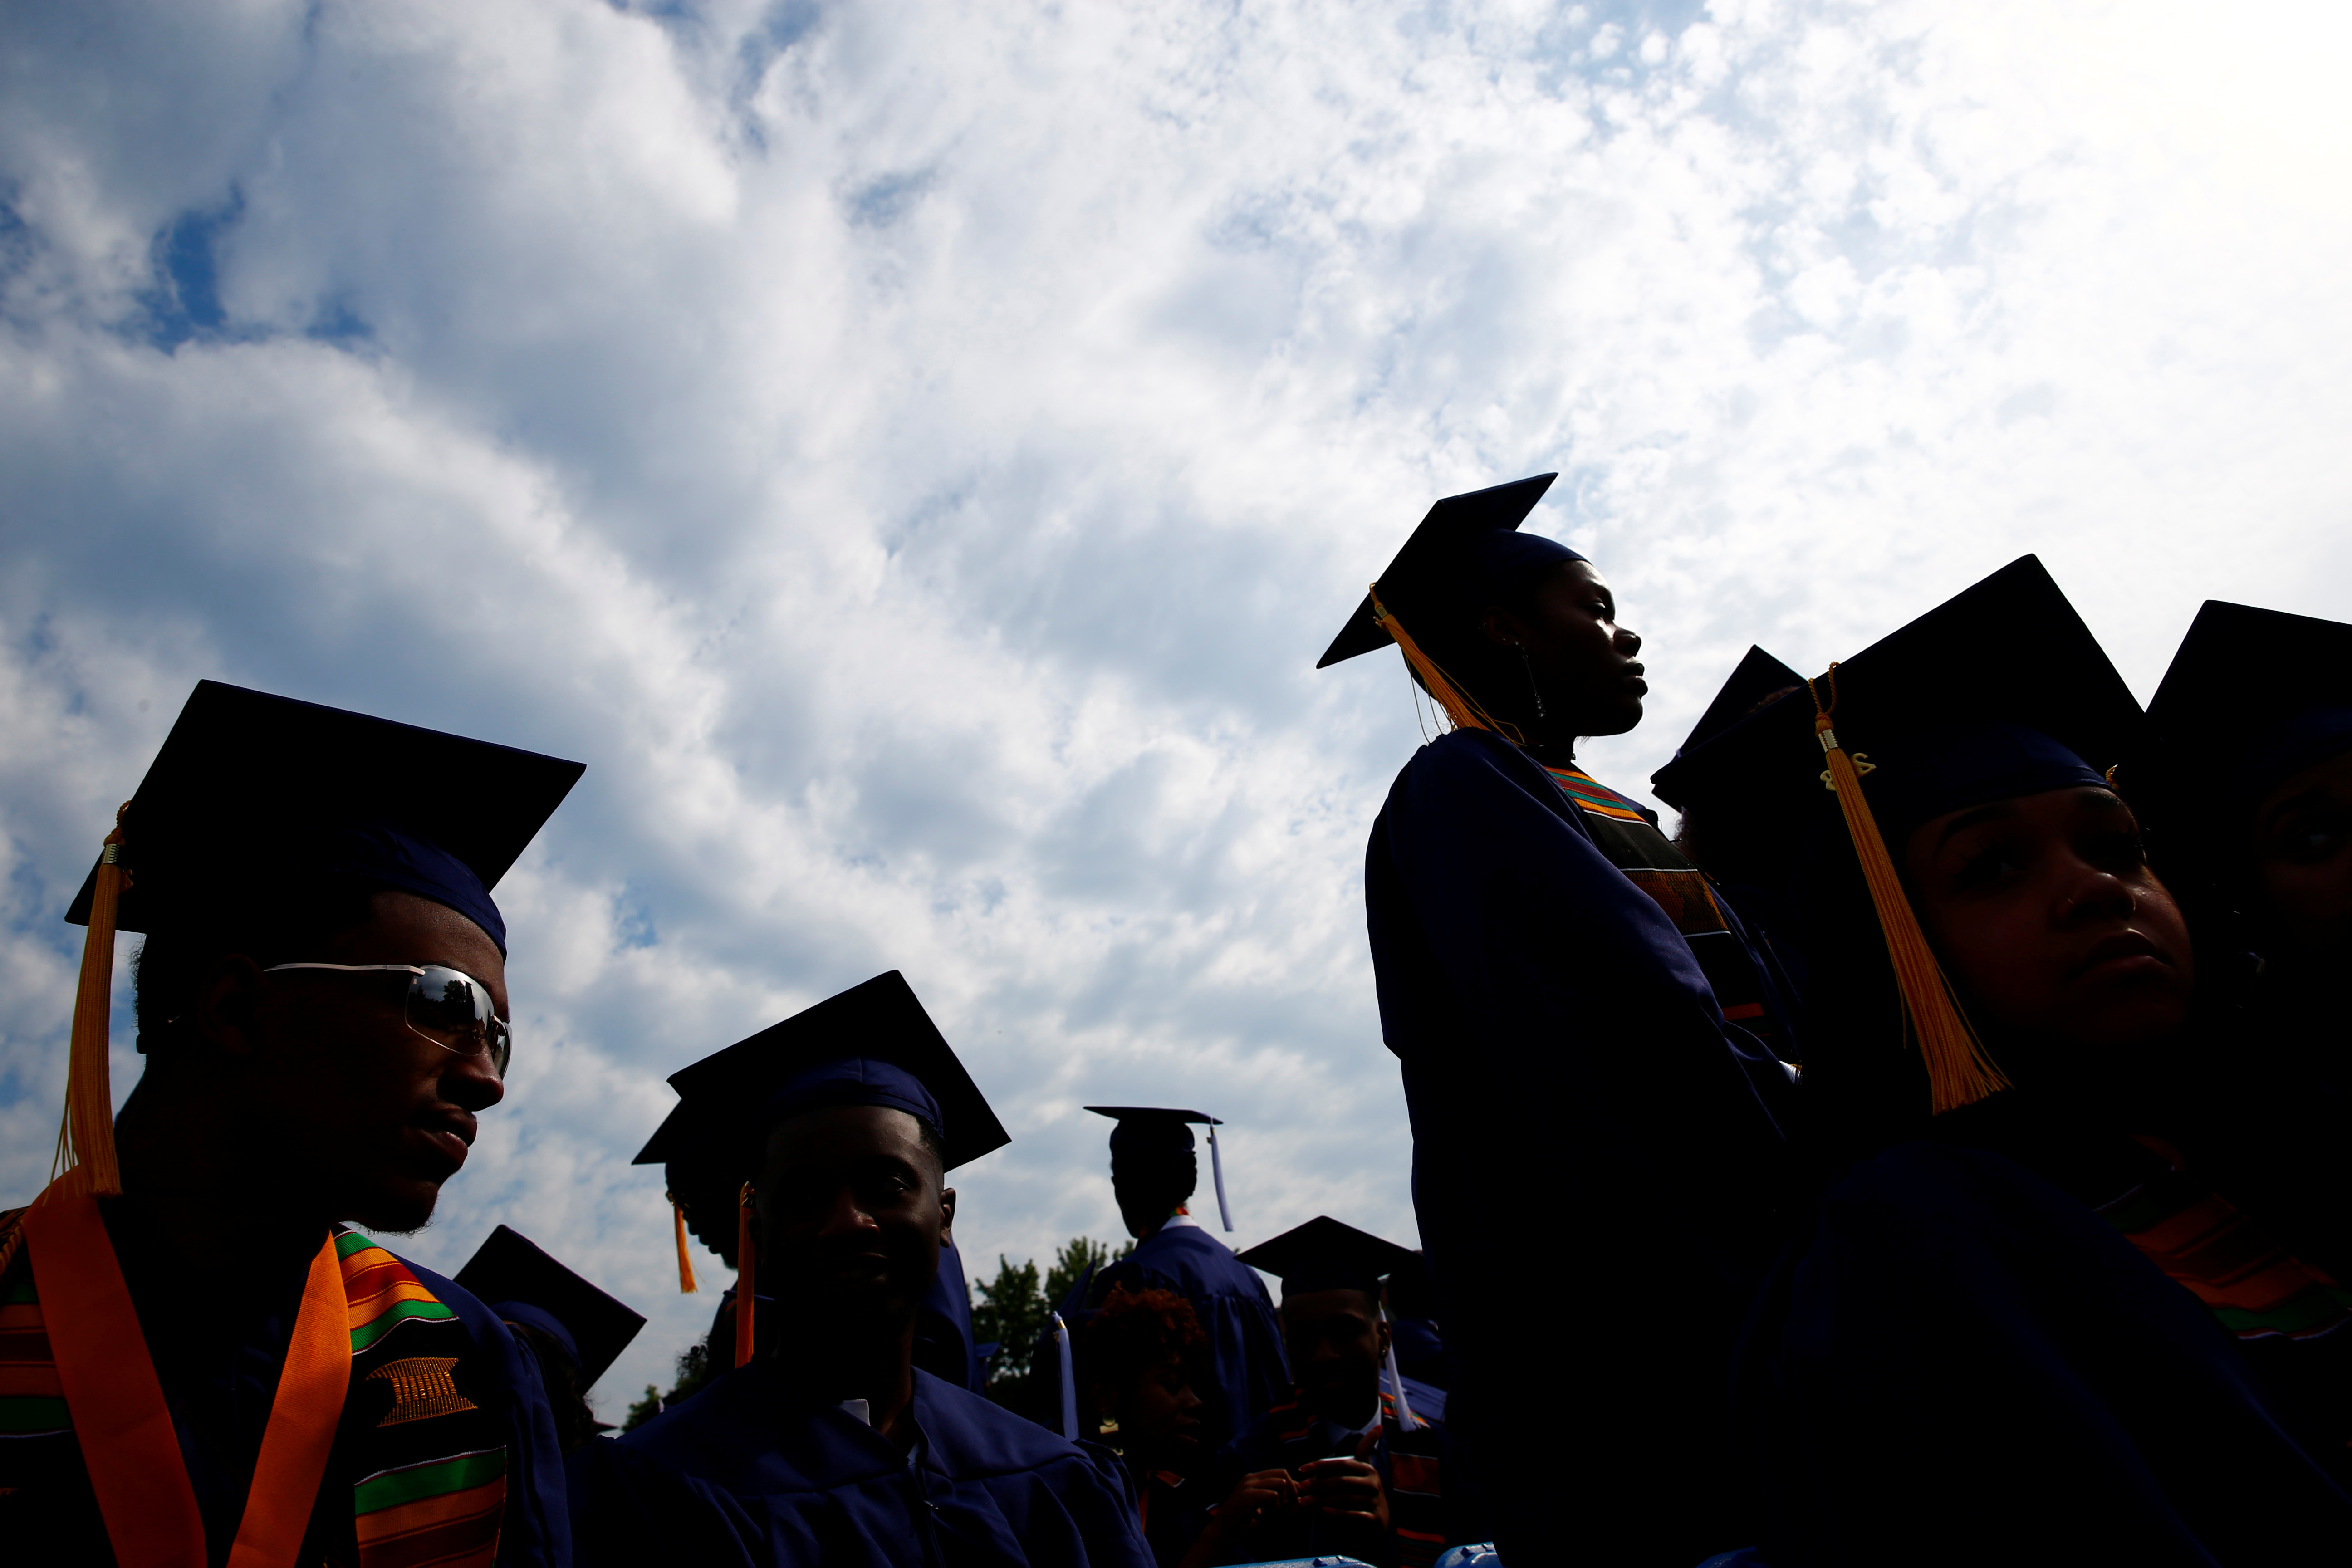 Graduates are seen before actor Chadwick Boseman addresses the 150th commencement ceremony at Howard University in Washington, U.S. May 12, 2018. REUTERS/Eric Thayer